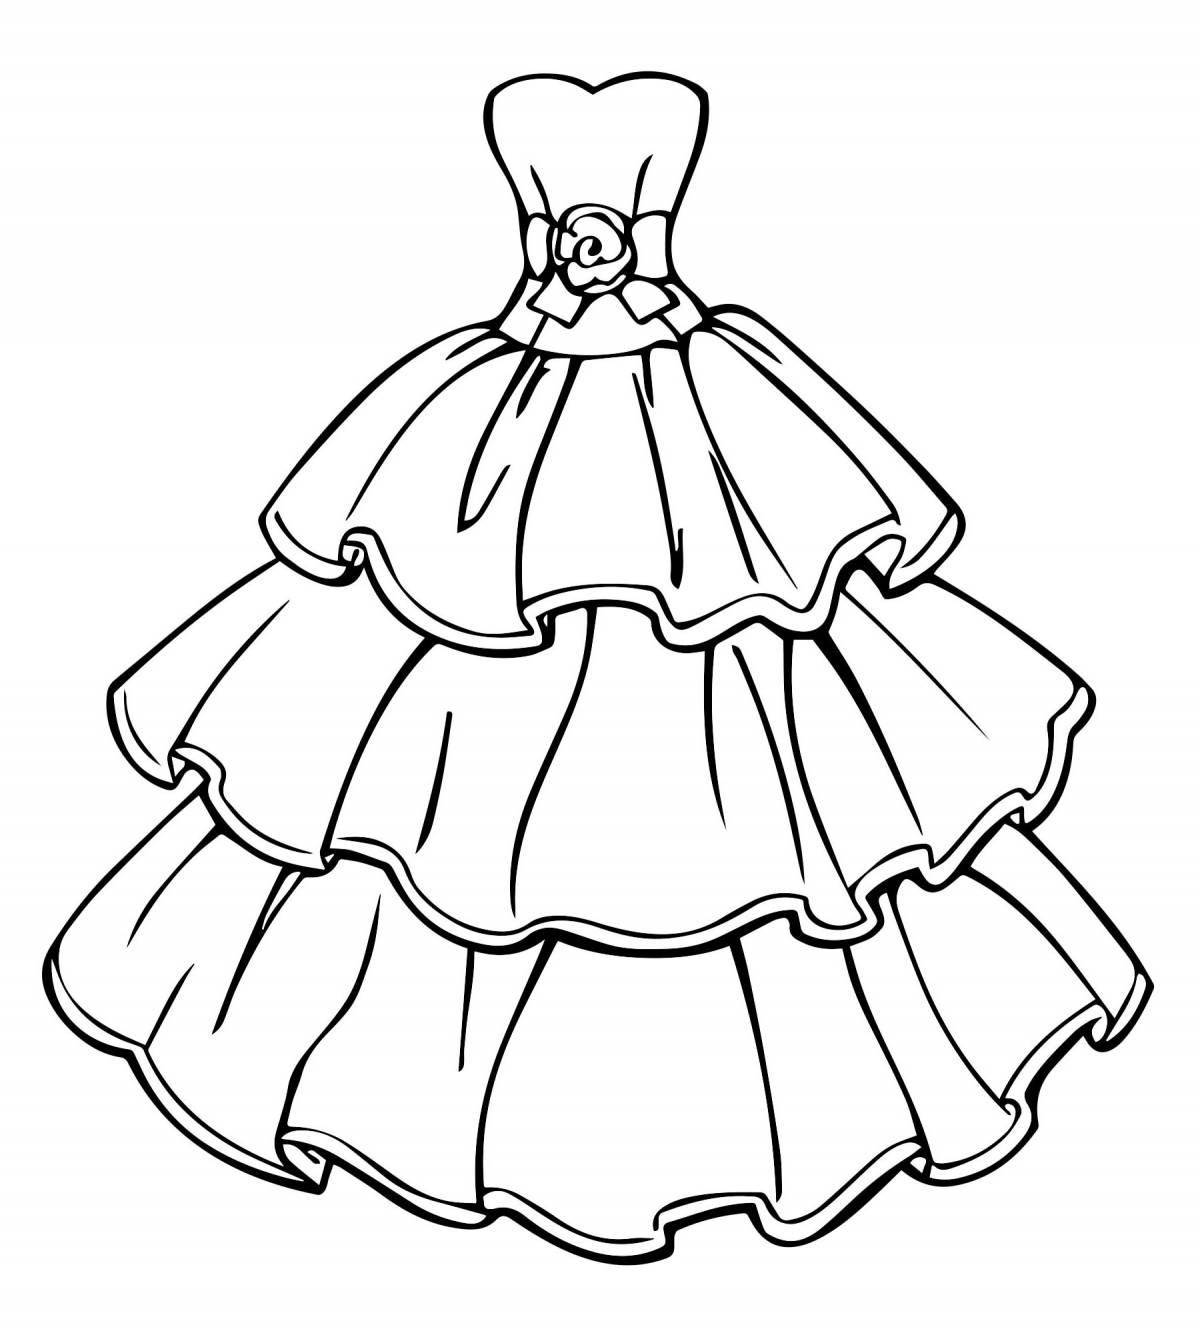 Ball gown splendid coloring page